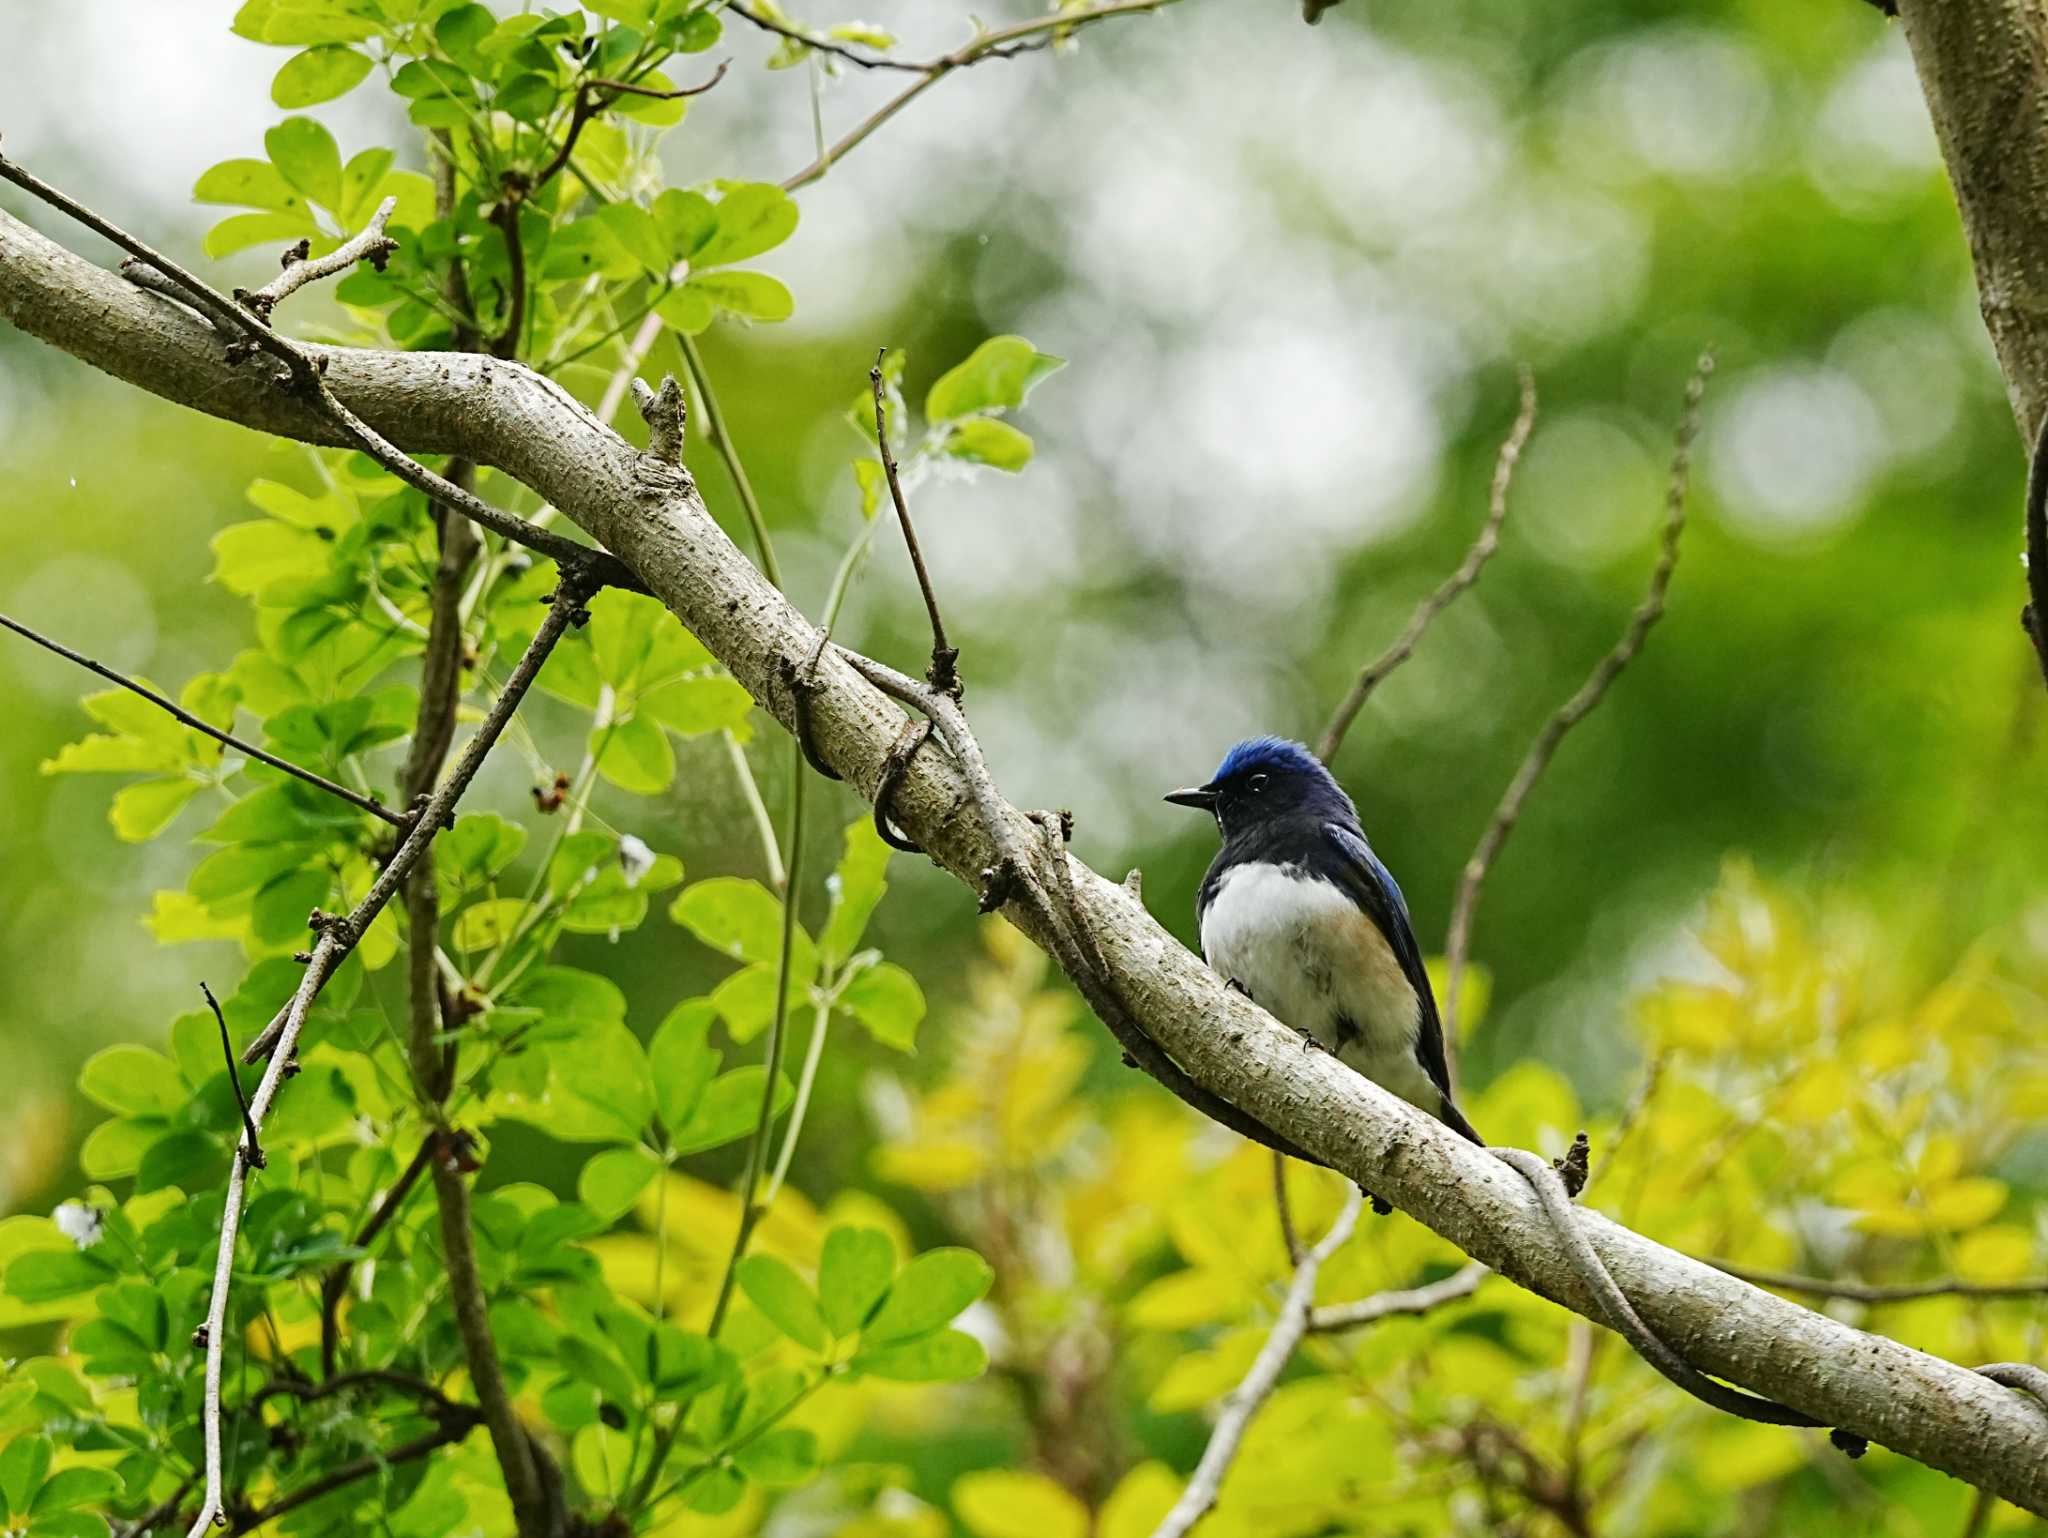 Photo of Blue-and-white Flycatcher at 宮ヶ瀬 by yumineko